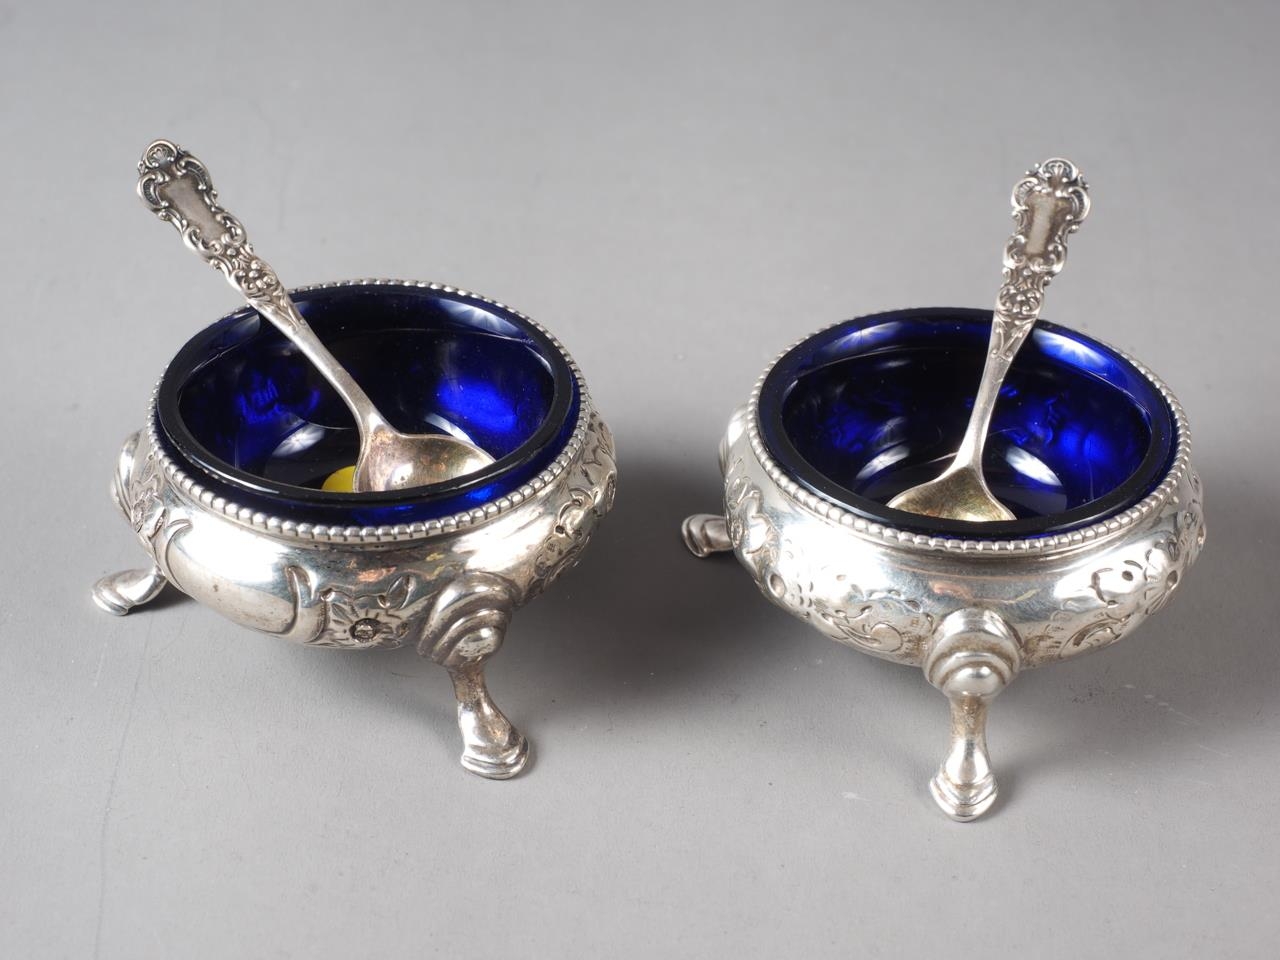 A pair of Victorian silver cauldron salts with embossed decoration, blue glass liners and a pair